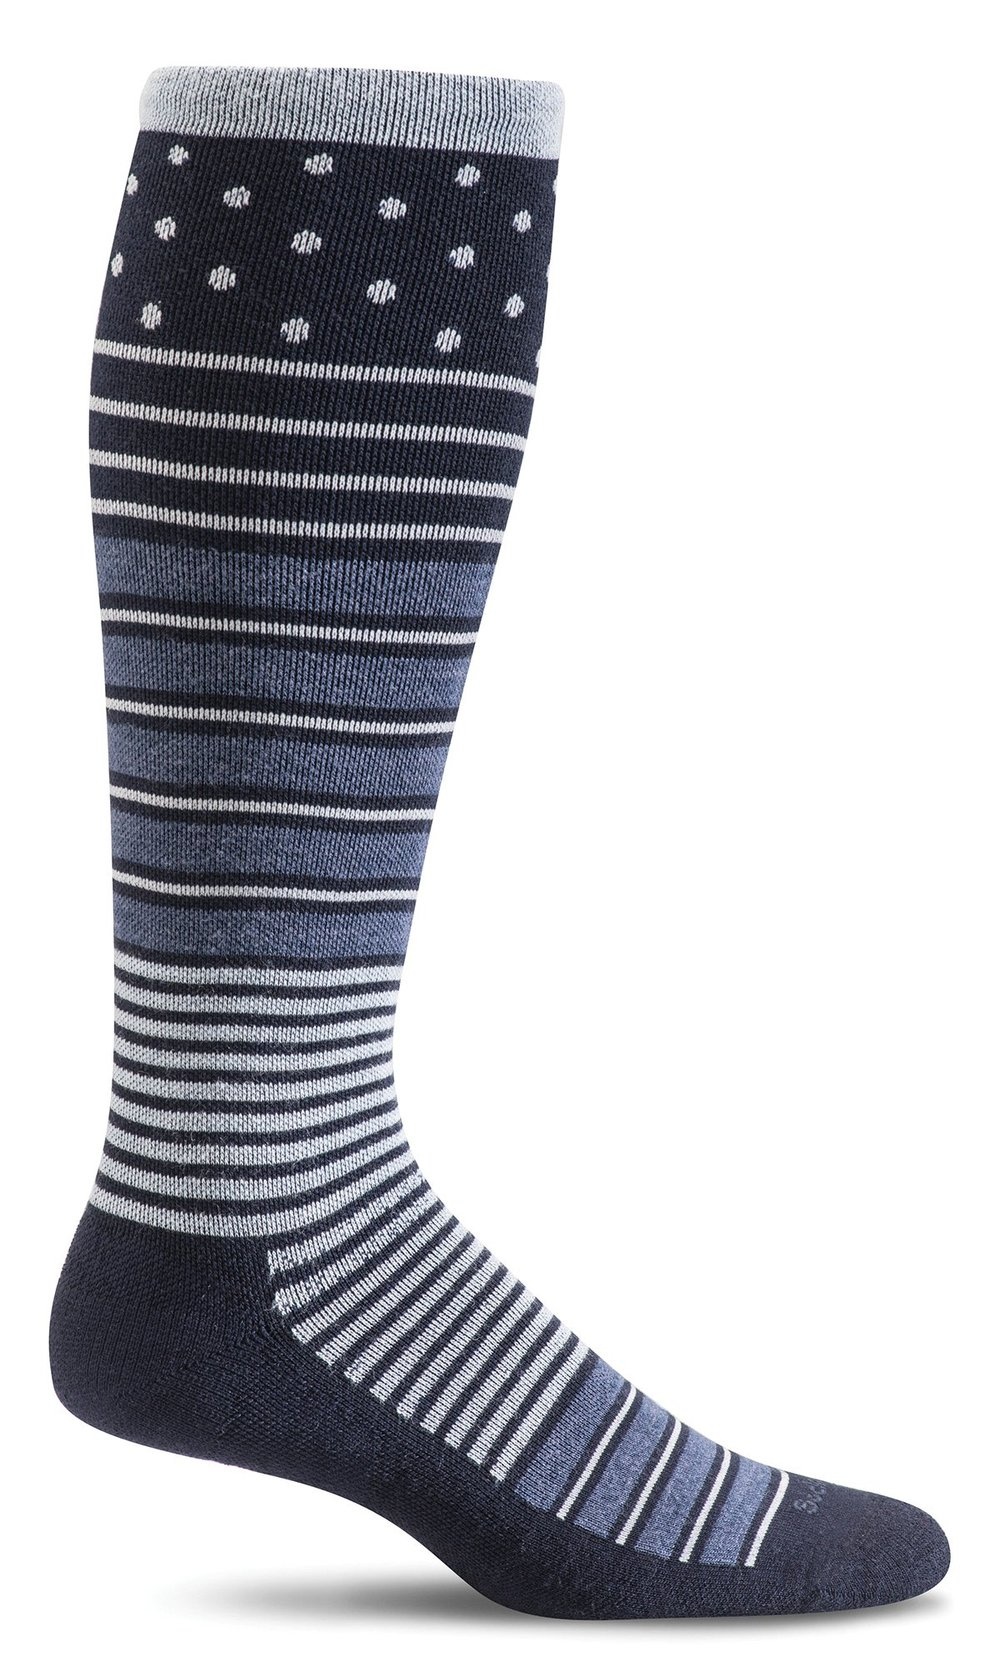 Sockwell - Firm Lifestyle Compression Twister SW29W Navy Women's